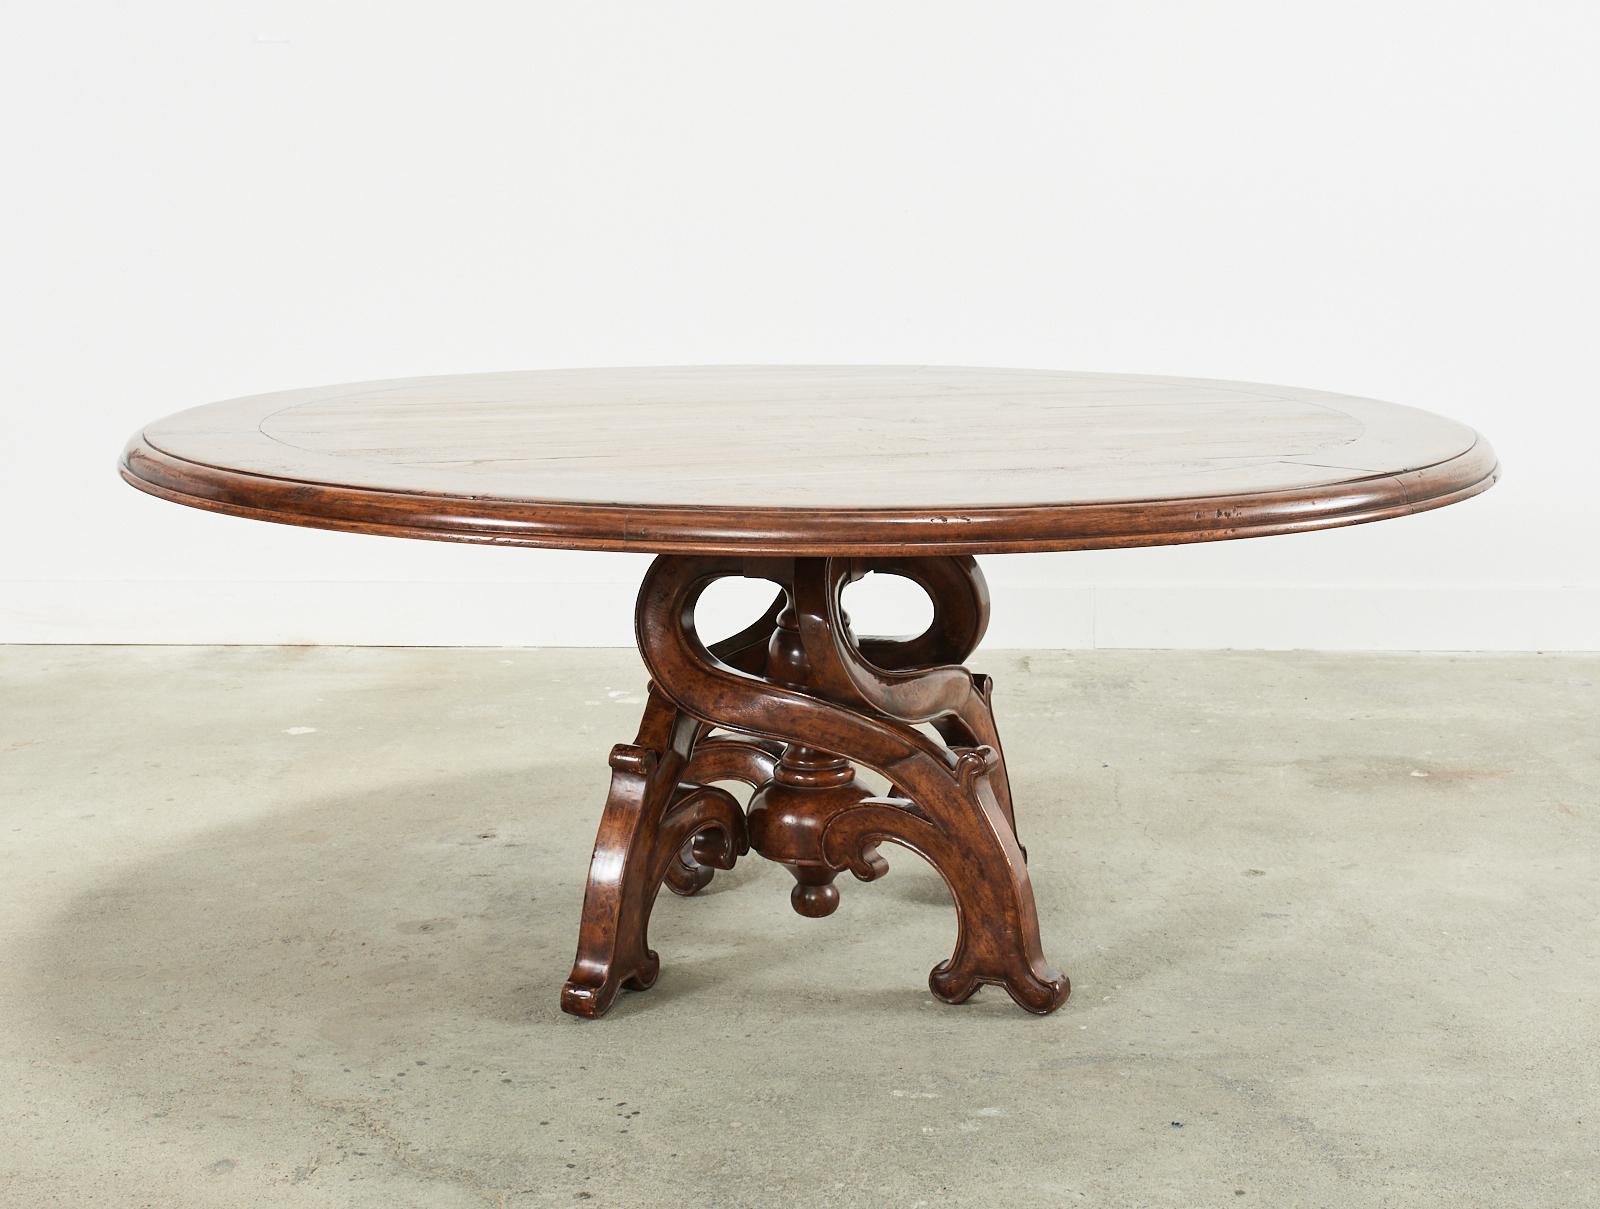 Stunning grand Barcelona baroque style round dining table by Michael Taylor Panache design. Model number # PAN-1257A is a 72-inch diameter round, four leg table featuring a spiral carved or intertwined leg pedestal base. Supporting a large plank top